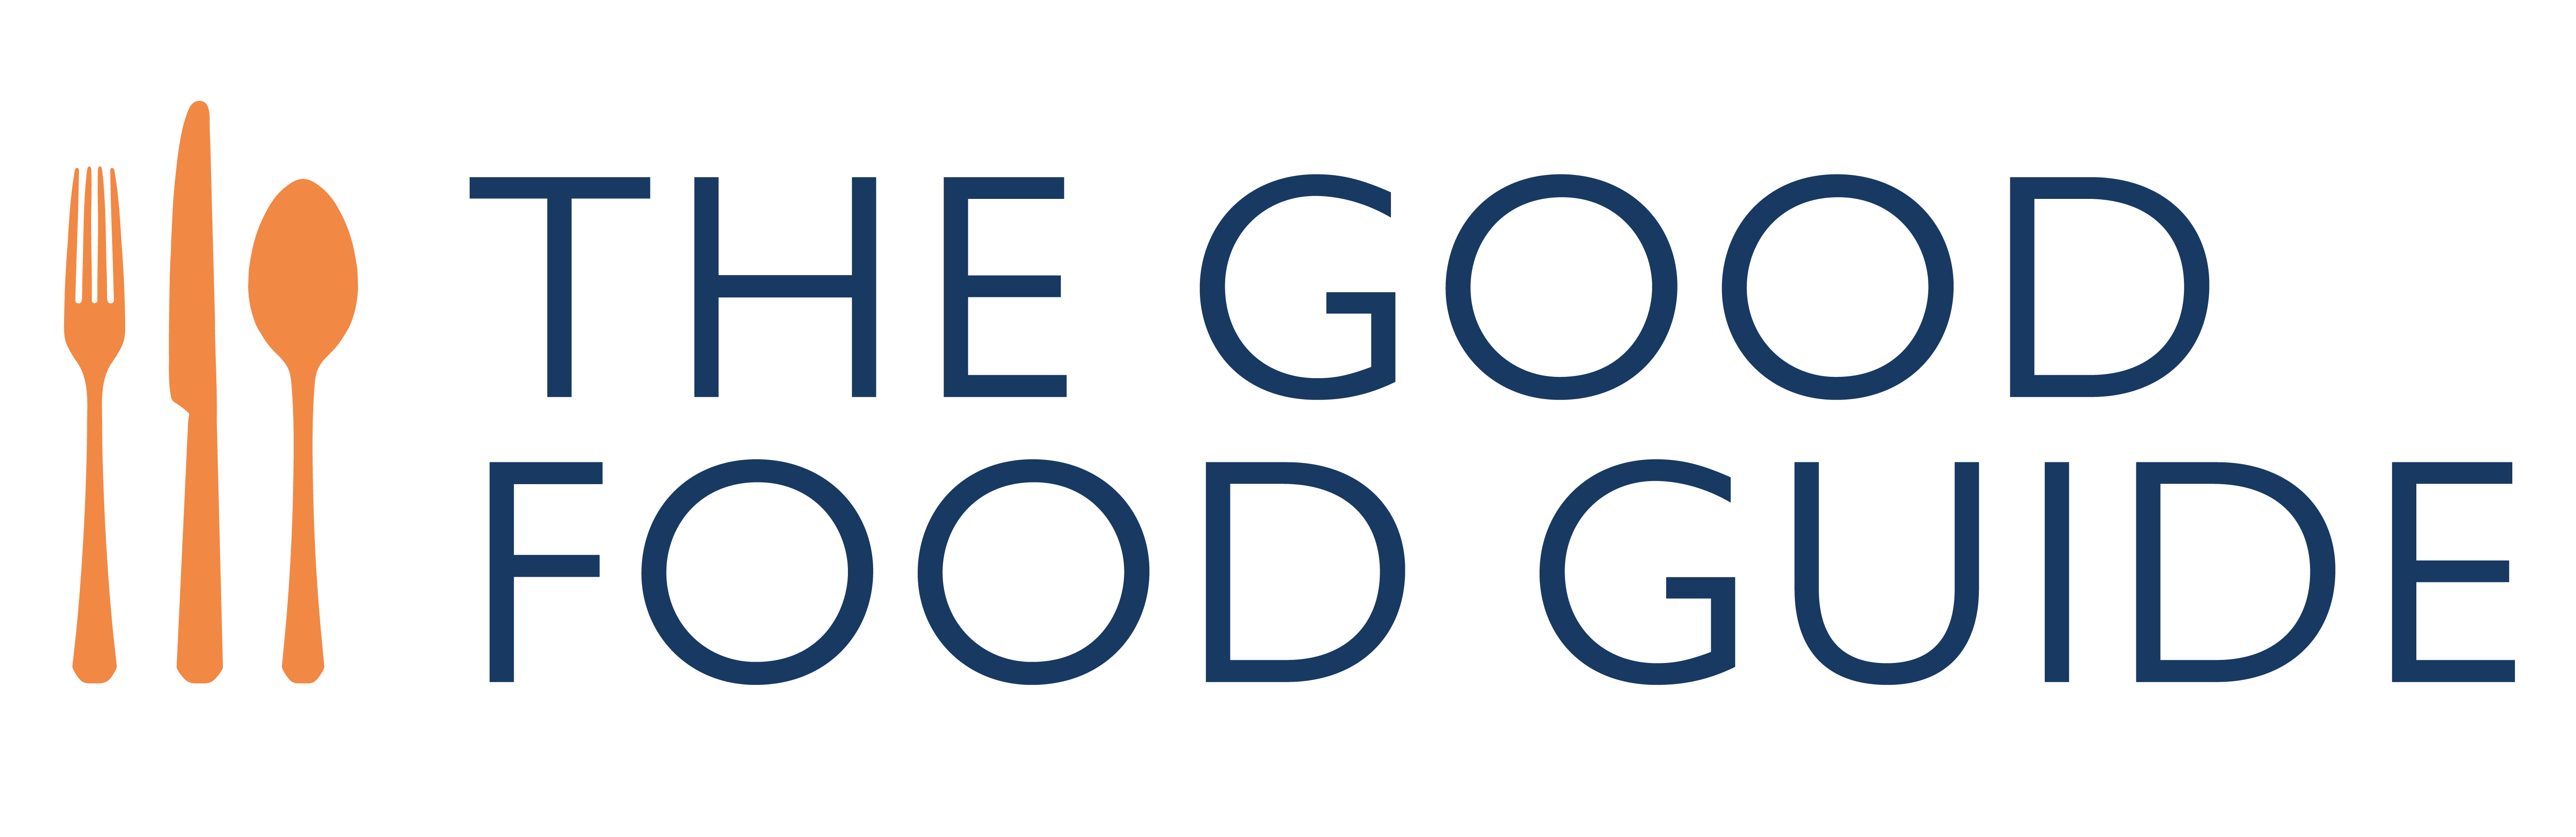 The Good Food Guide logo